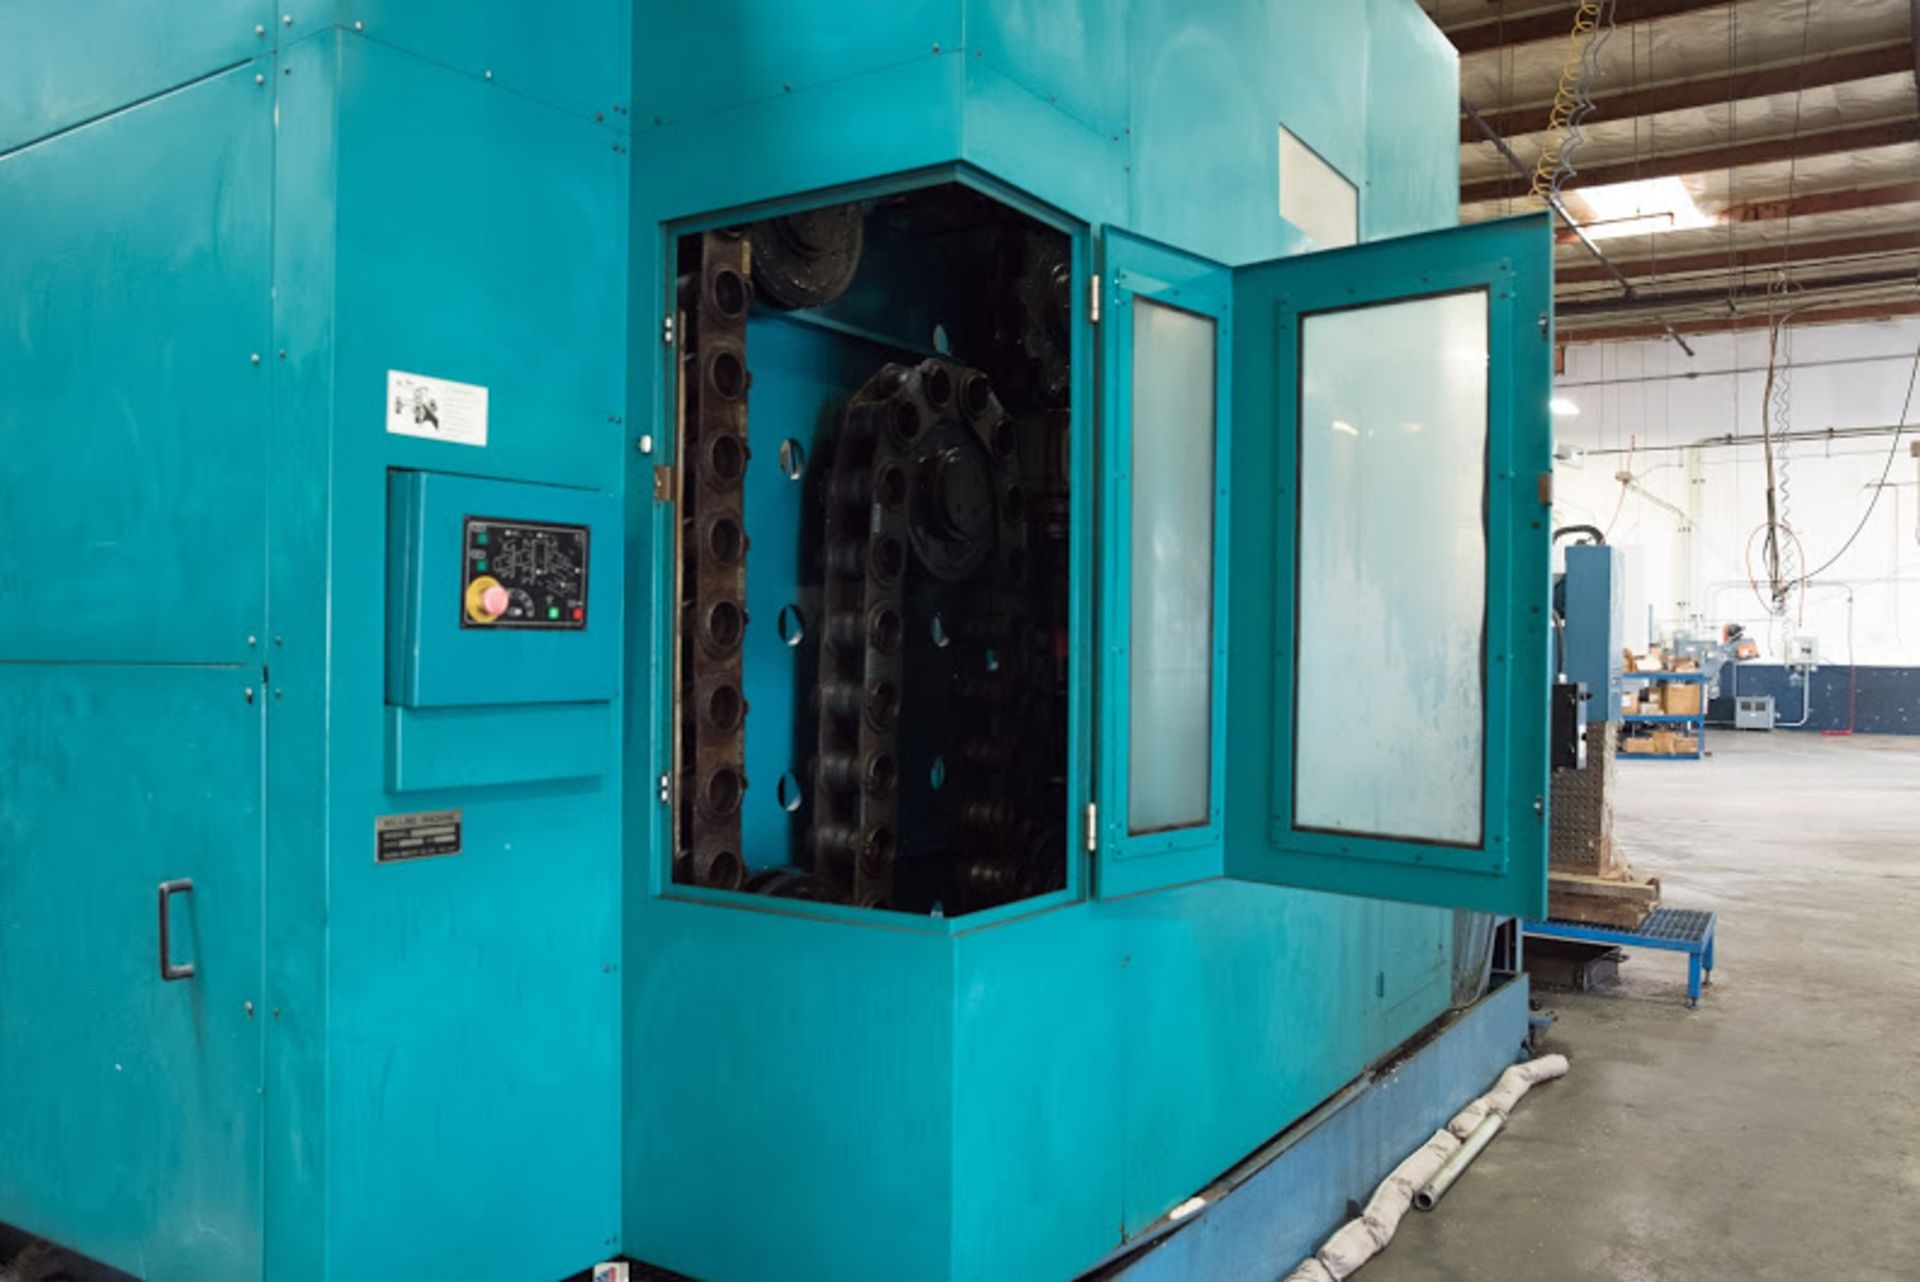 30" x 30" x 25" Travels Kasuga Quantum CNC 4 Axis Horizontal Machining Center - Located In: - Image 11 of 25